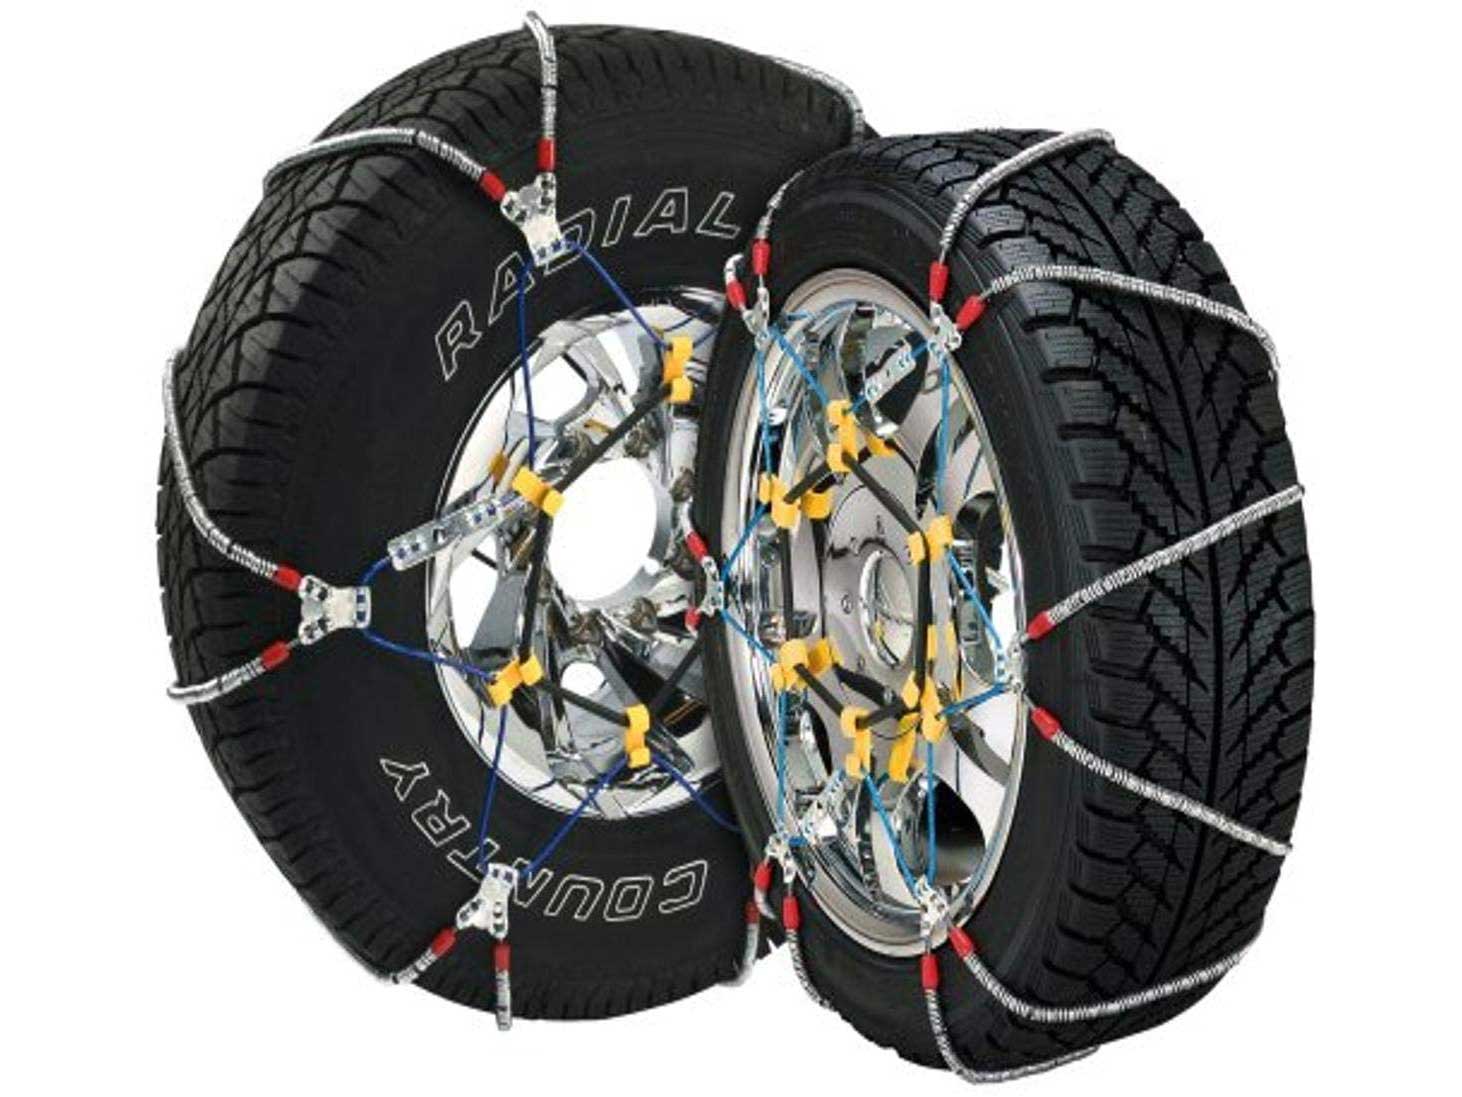 Security Chain Company SZ137 Super Z6 Cable Tire Chain for Passenger Cars, Pickups, and SUVs - Set of 2